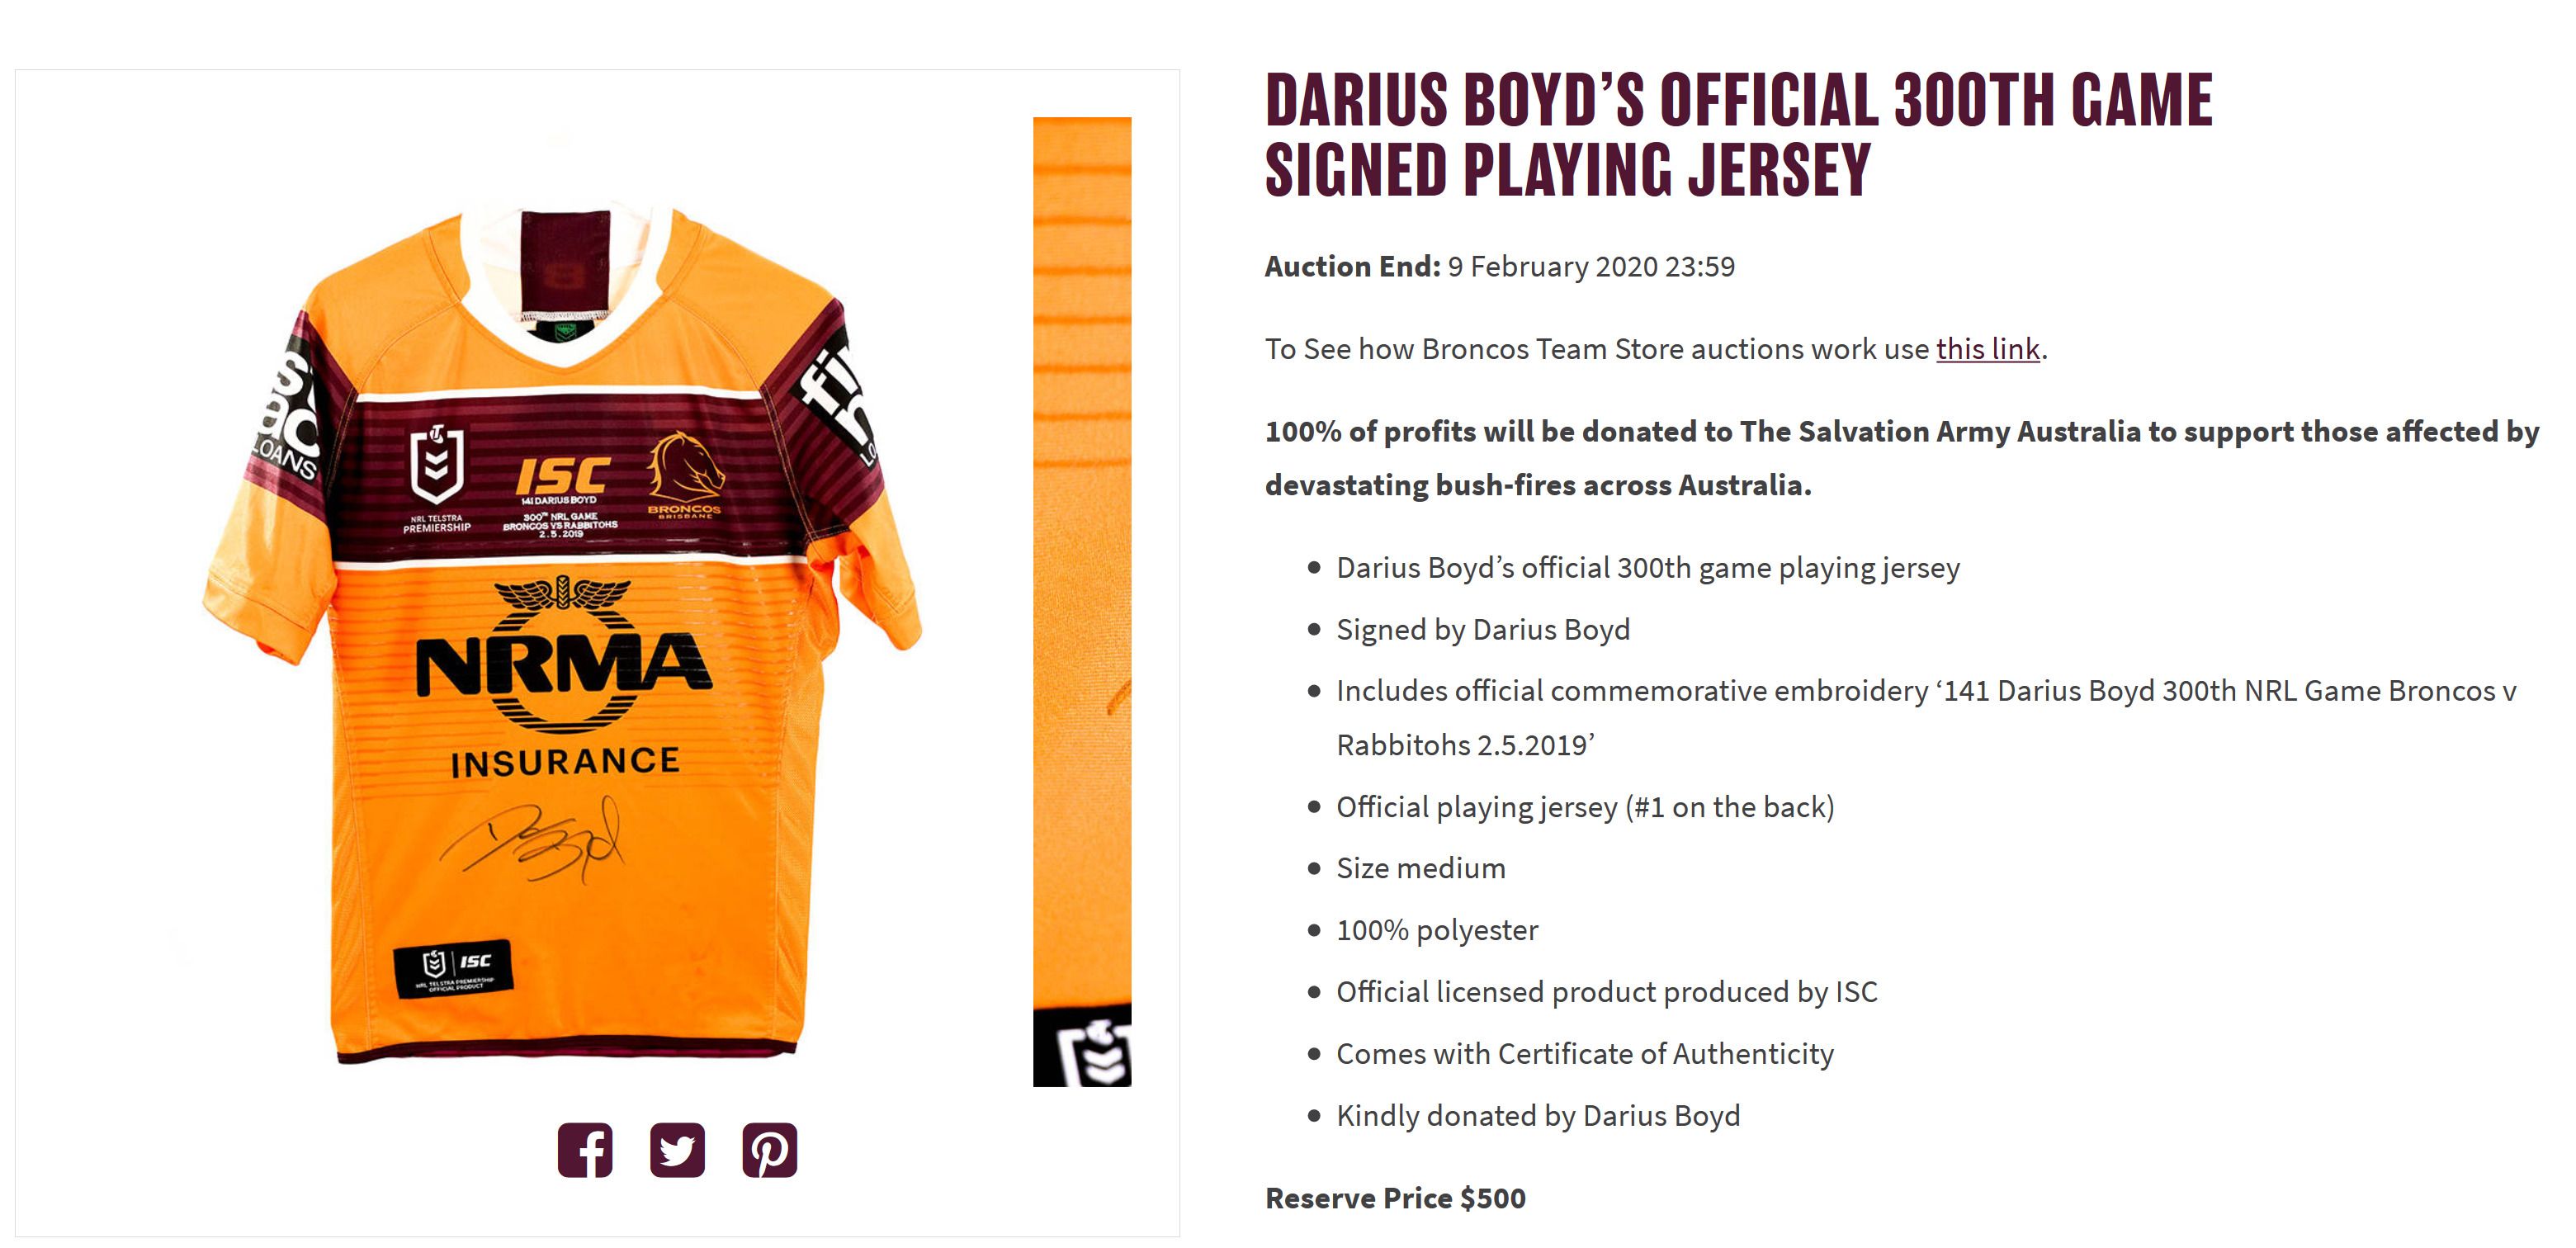 Screenshot 2020 01 23 Darius Boyds official 300th game signed playing jersey